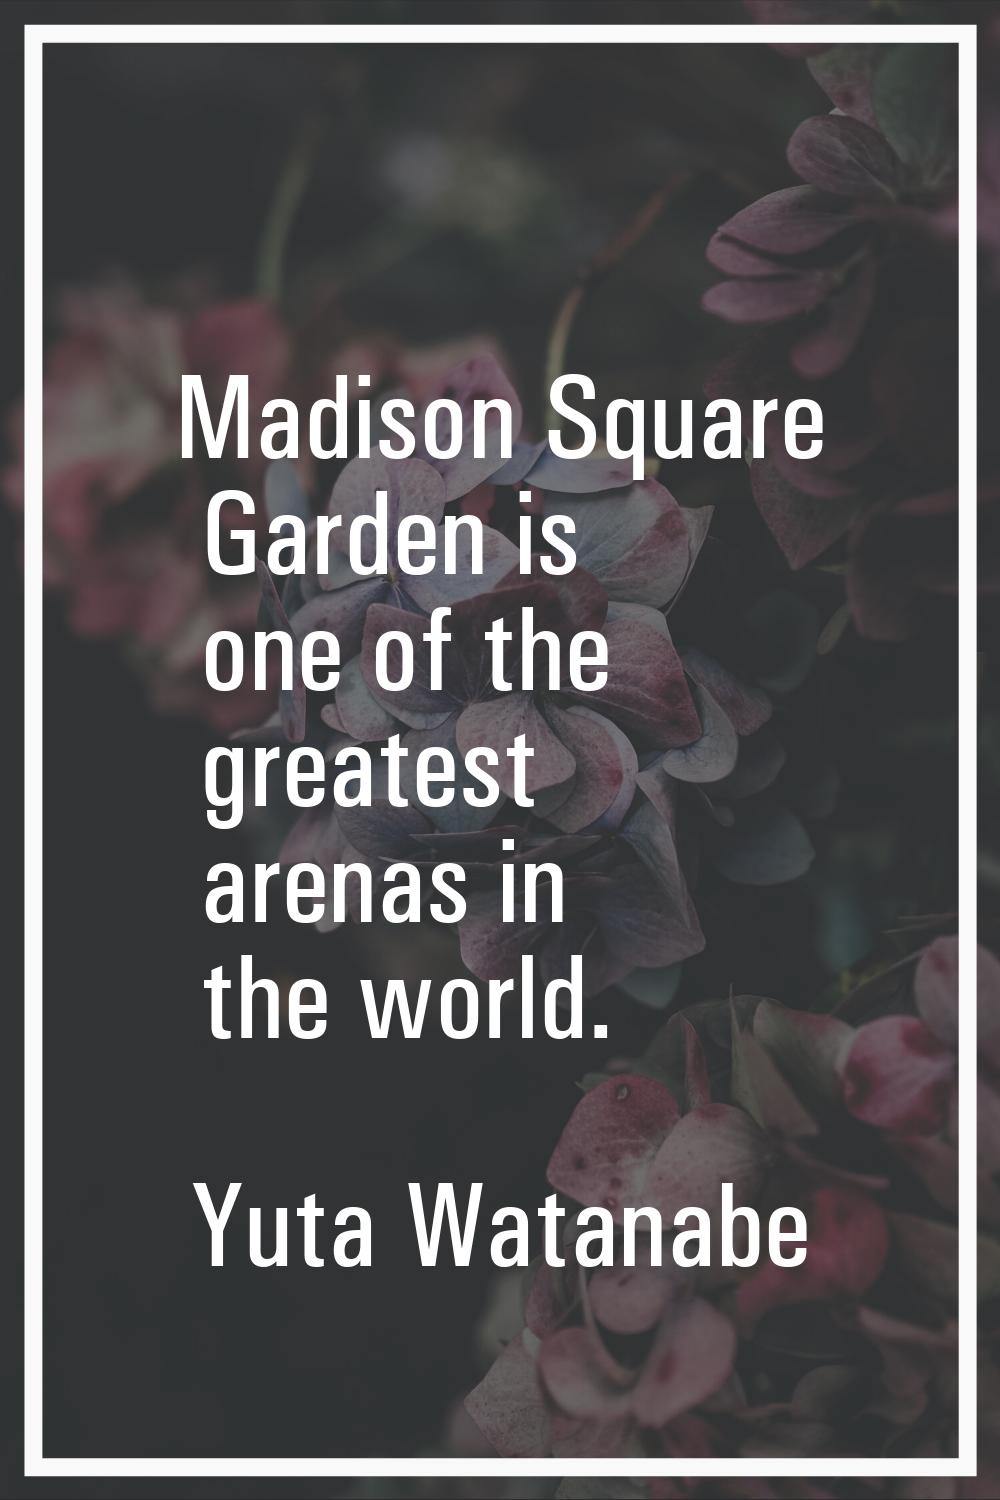 Madison Square Garden is one of the greatest arenas in the world.